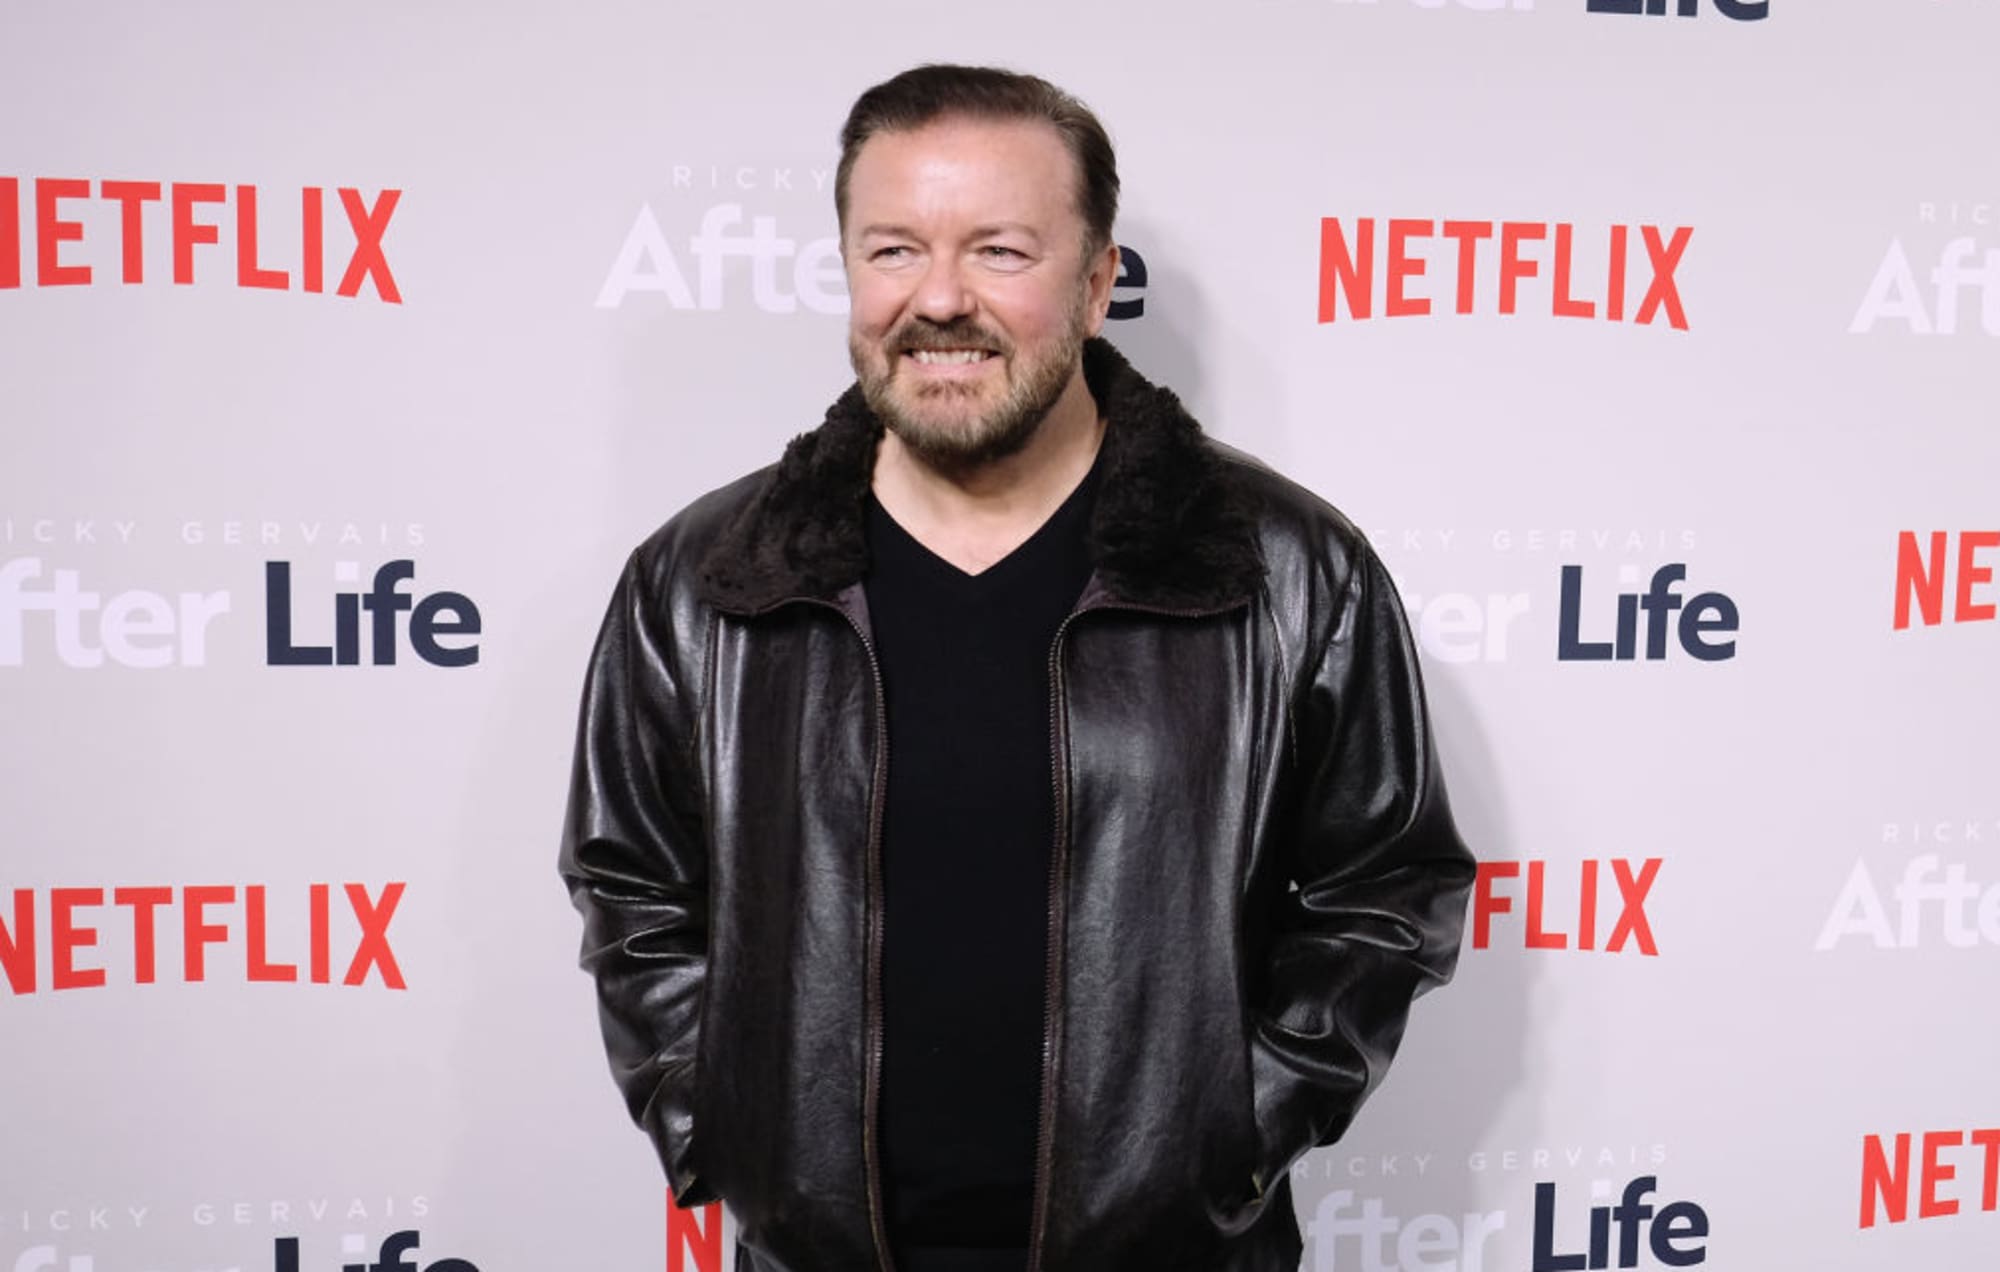 ricky-gervais-defends-his-netflix-show-against-comments-by-lgbt-rights-group